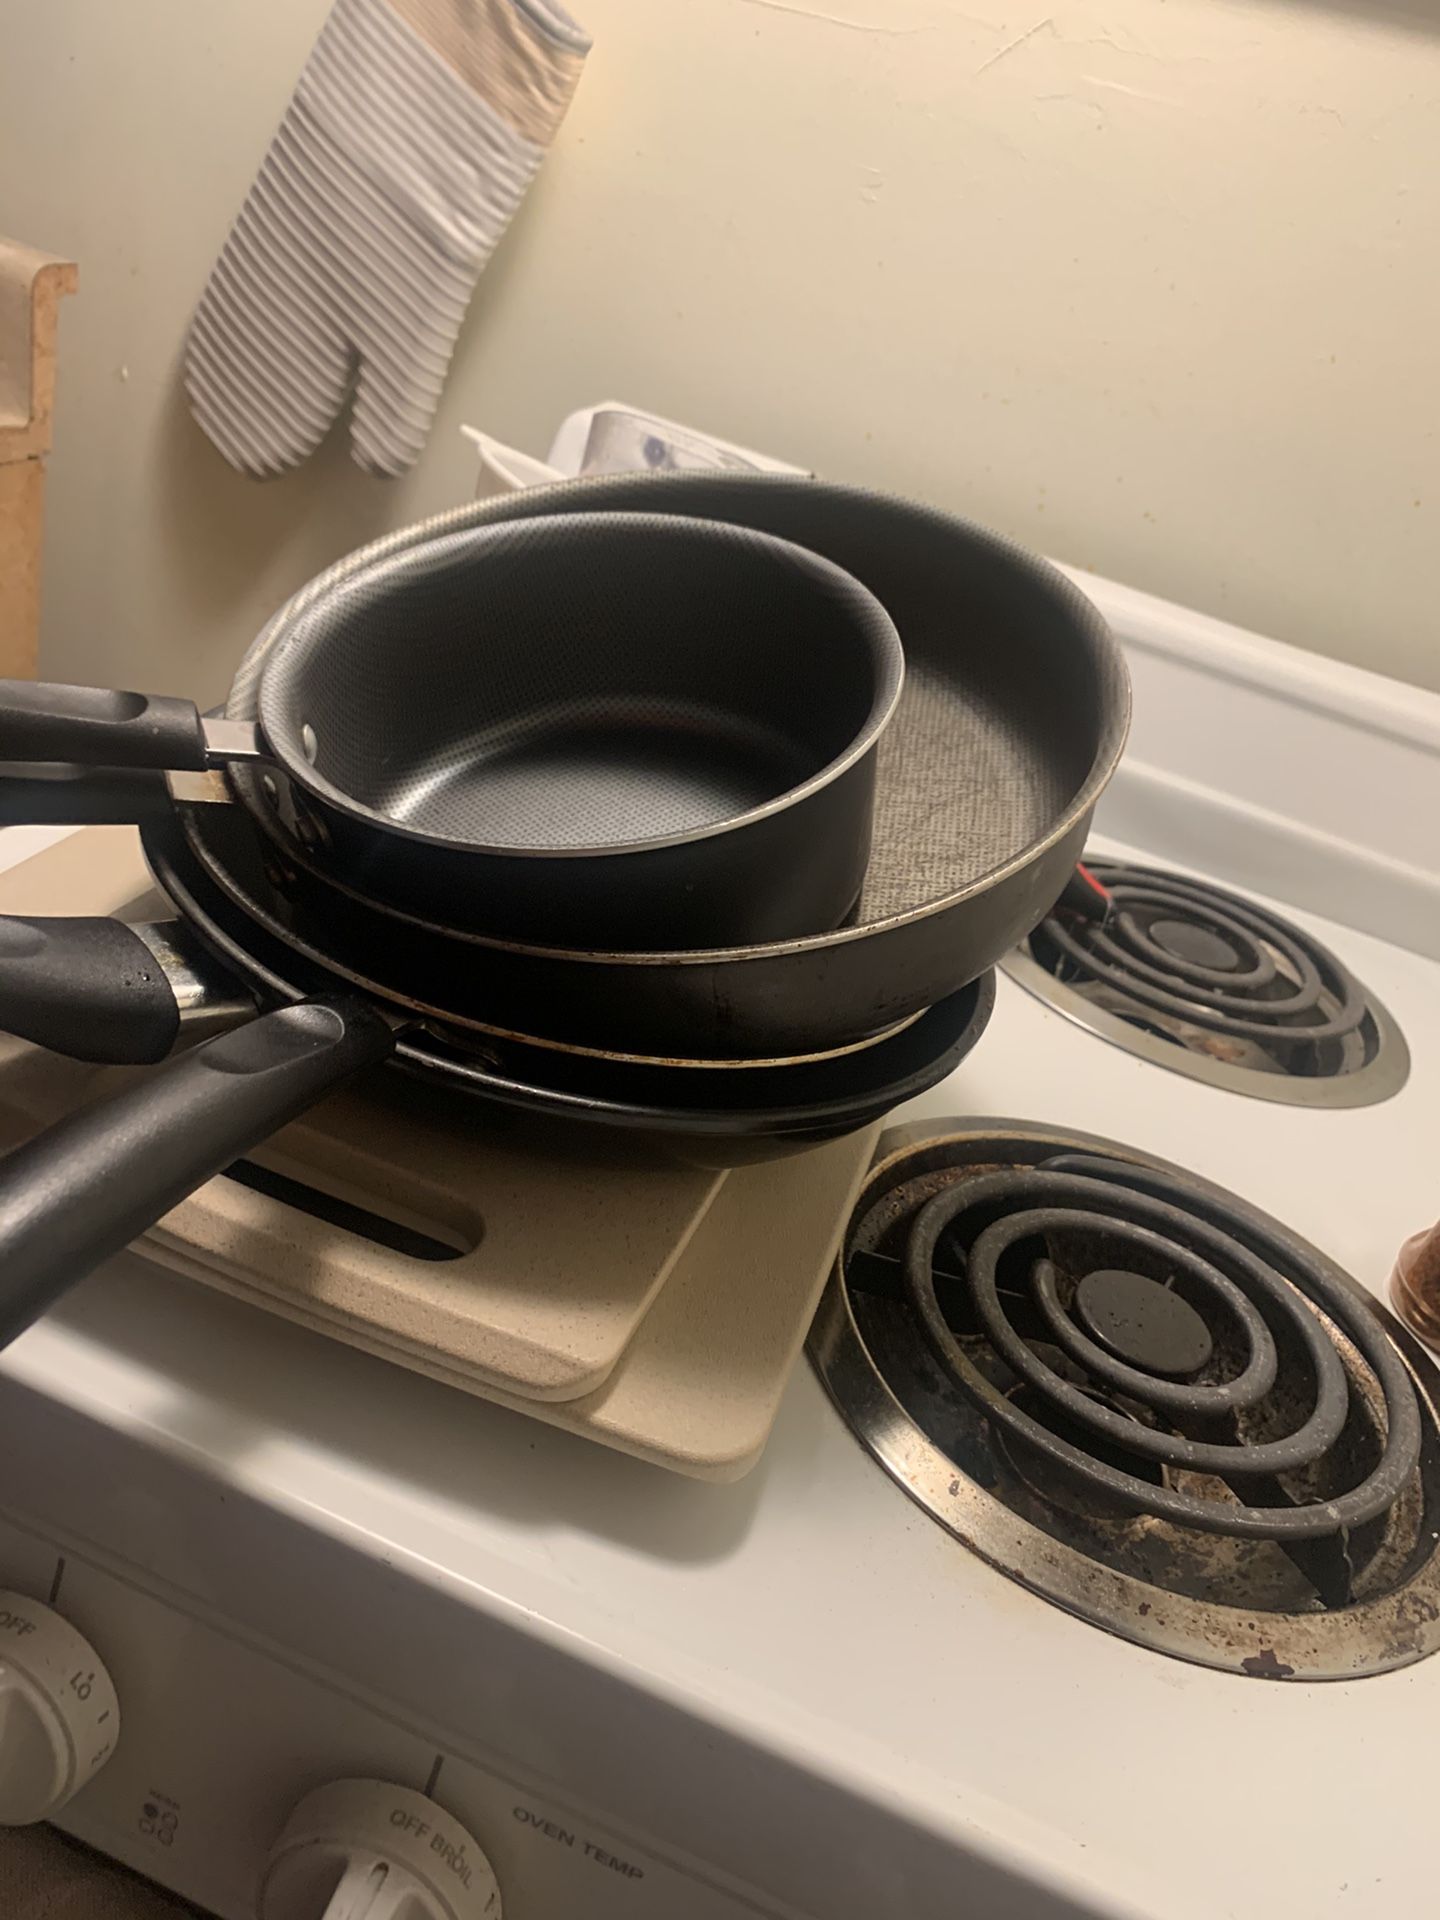 Free kitchen pots and miscellaneous